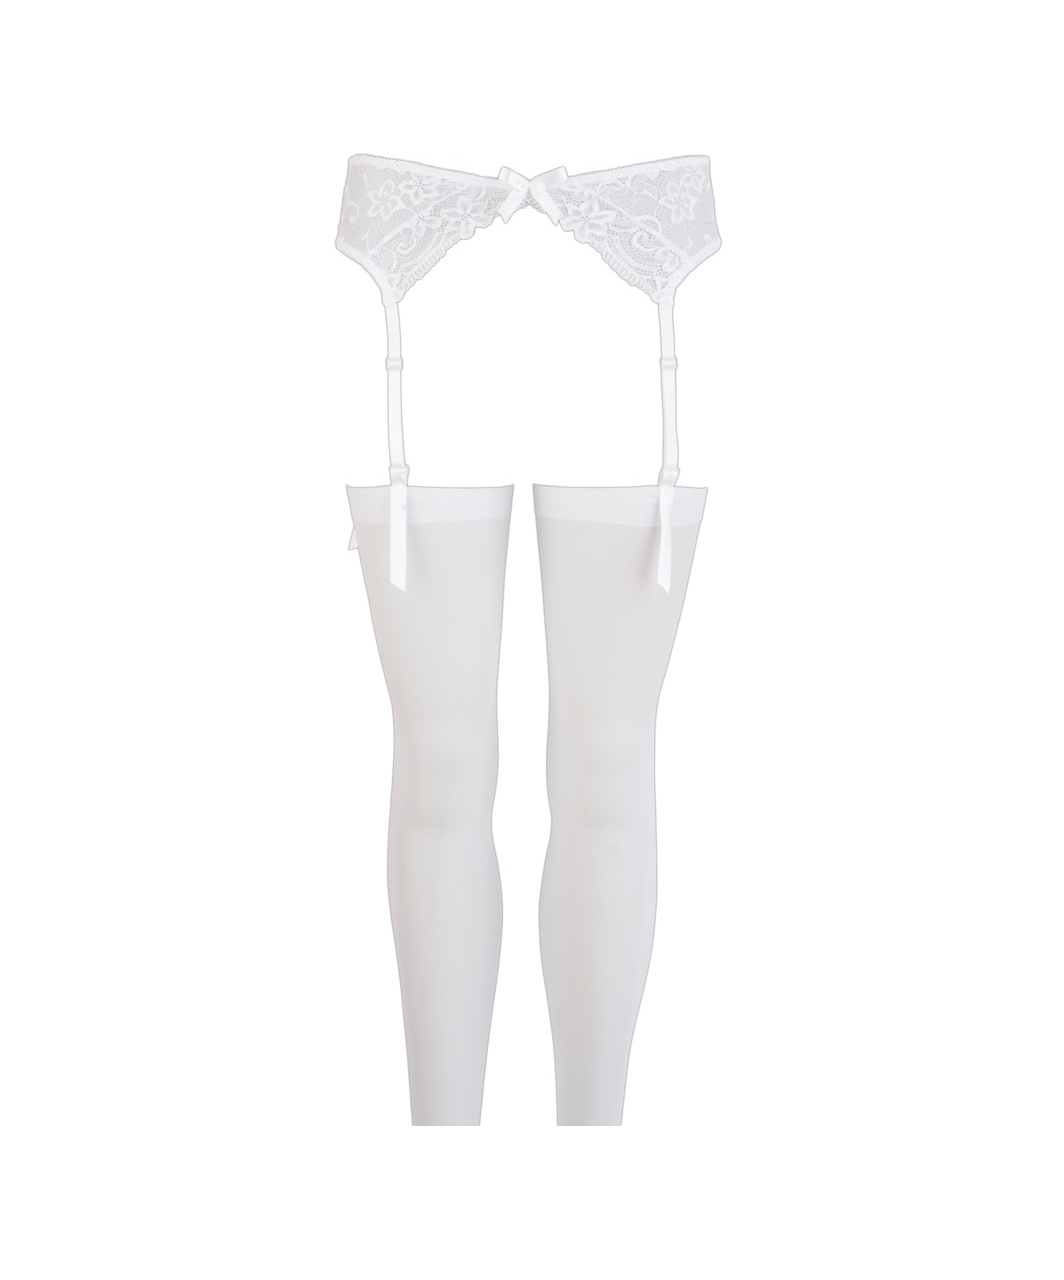 NO:XQSE white lace garter belt with stockings